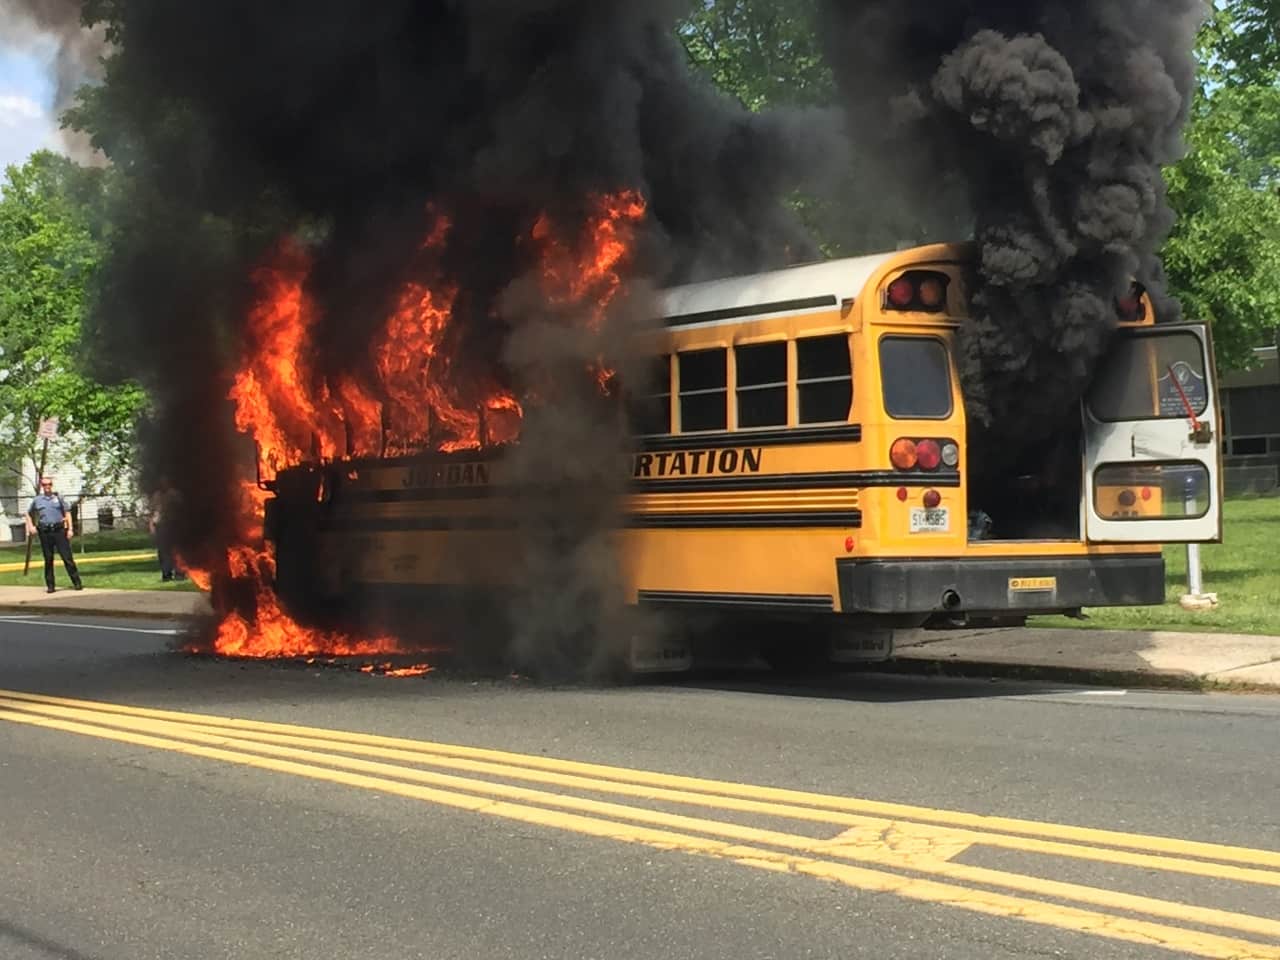 A school bus caught fire Monday afternoon near a Paramus middle school.